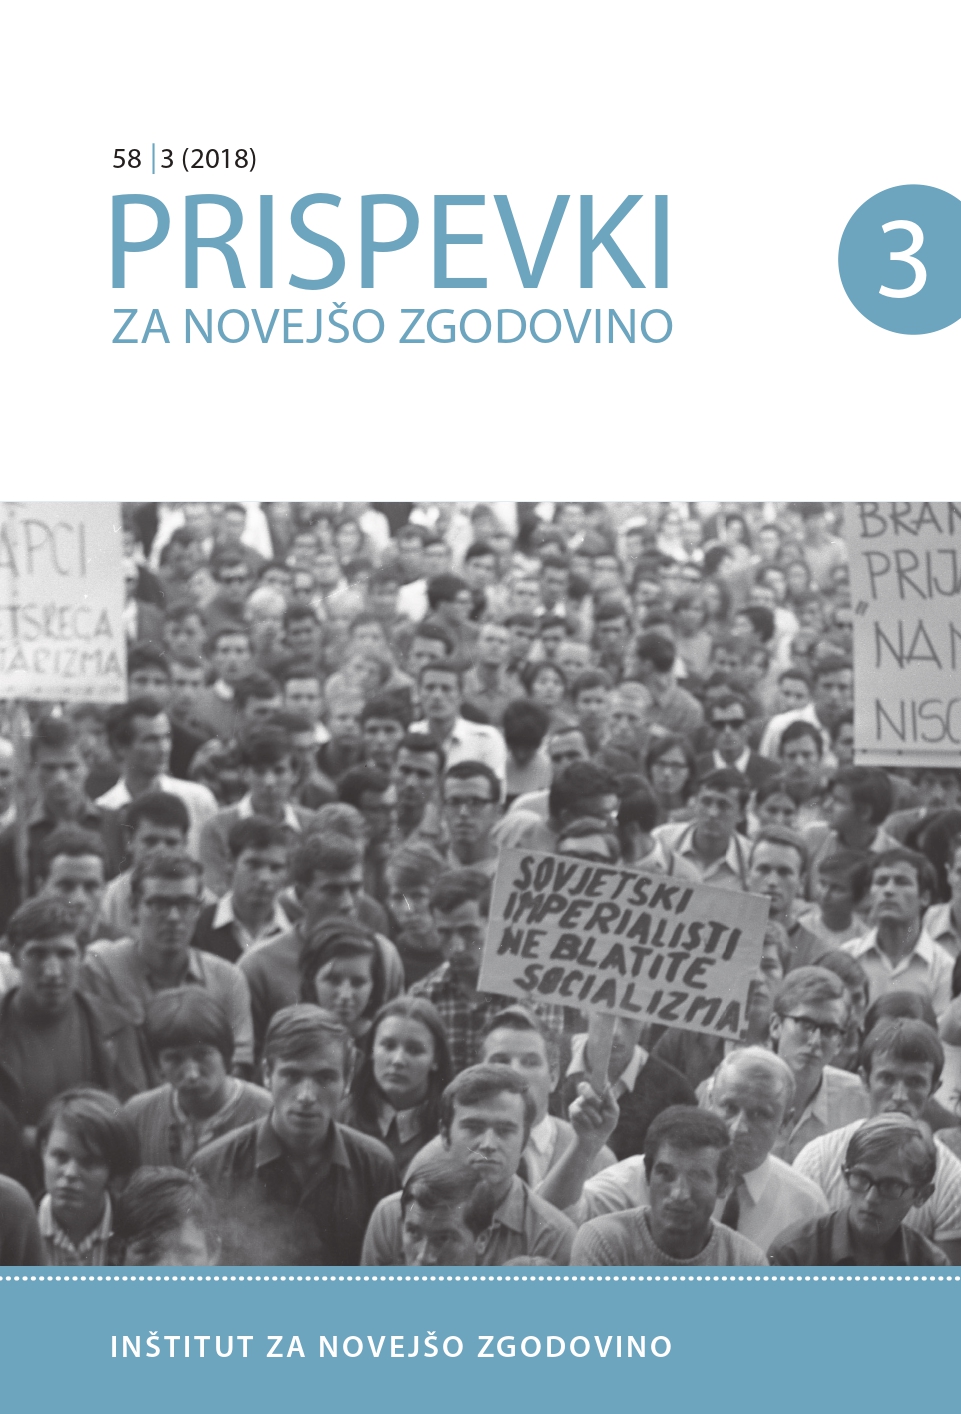 Journal Istarski Borac/IBOR in the Context of the Culture of Dissent